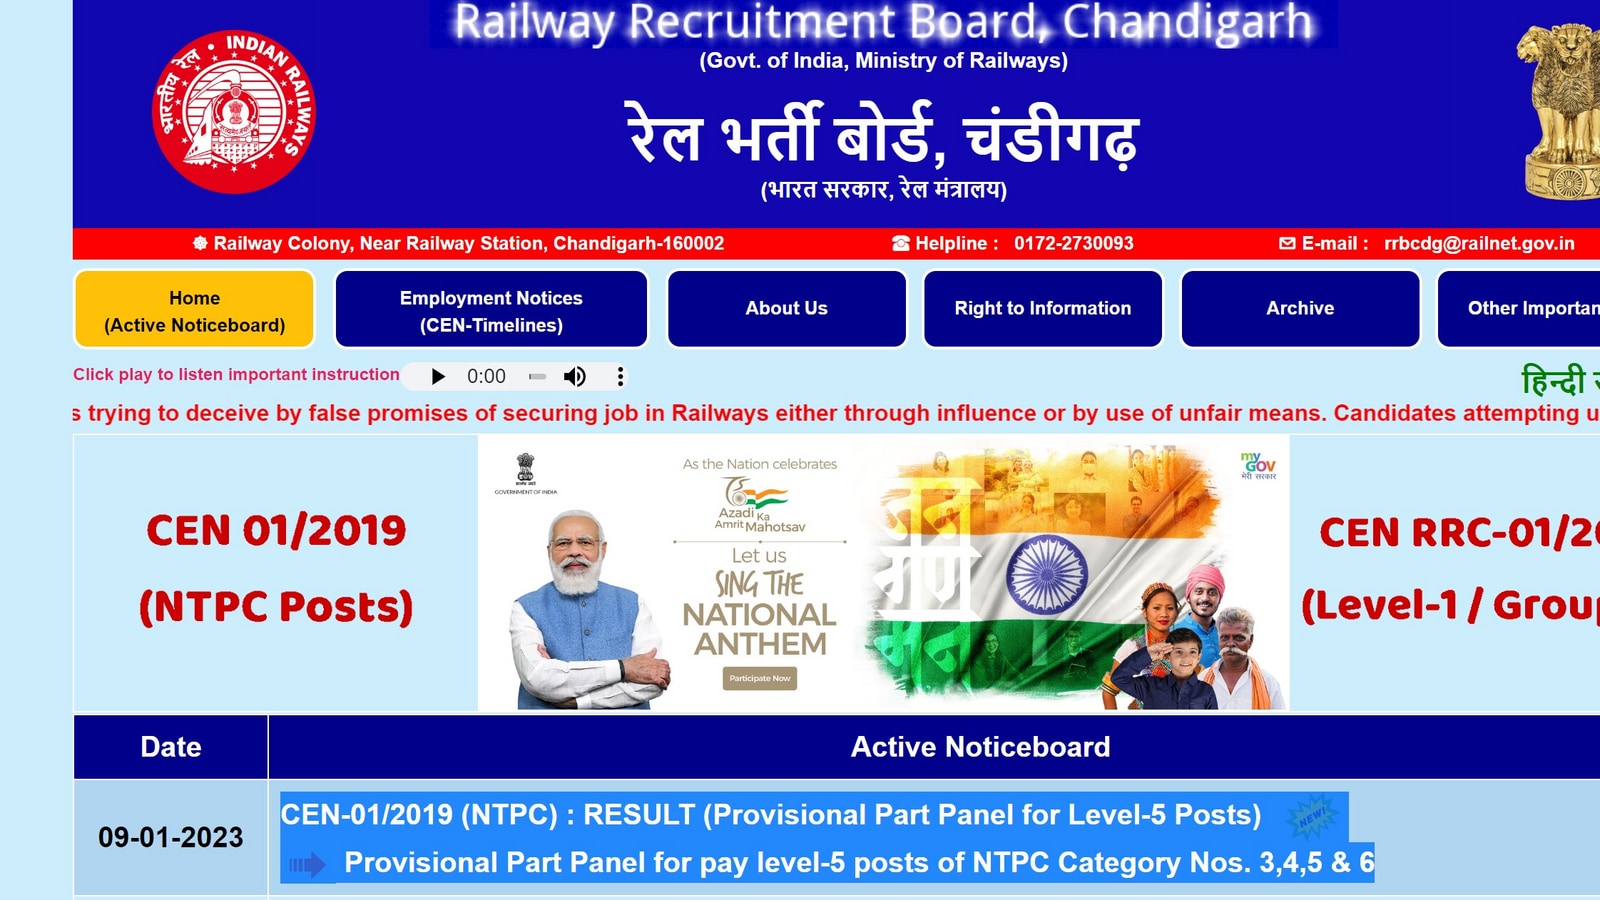 RRB NTCP result: List of empanelled candidates for level 5 out at rrbcdg.gov.in